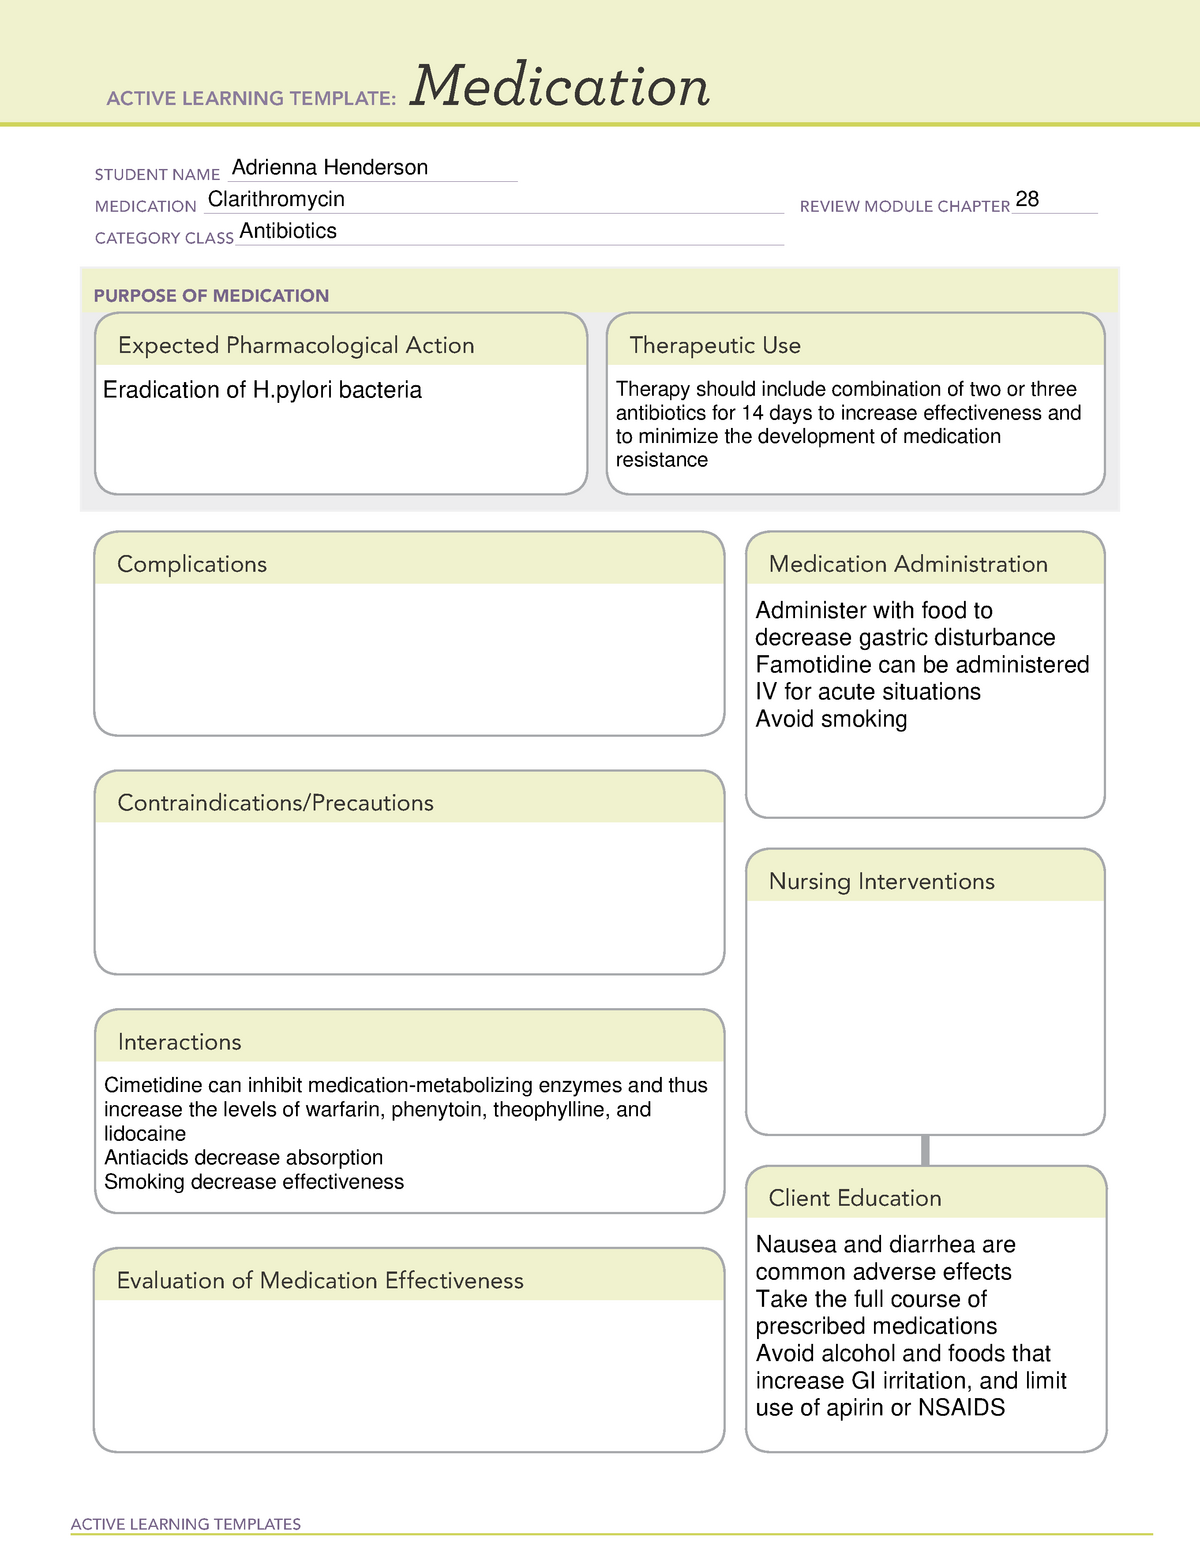 Clarithromycin Medication Template ACTIVE LEARNING TEMPLATES